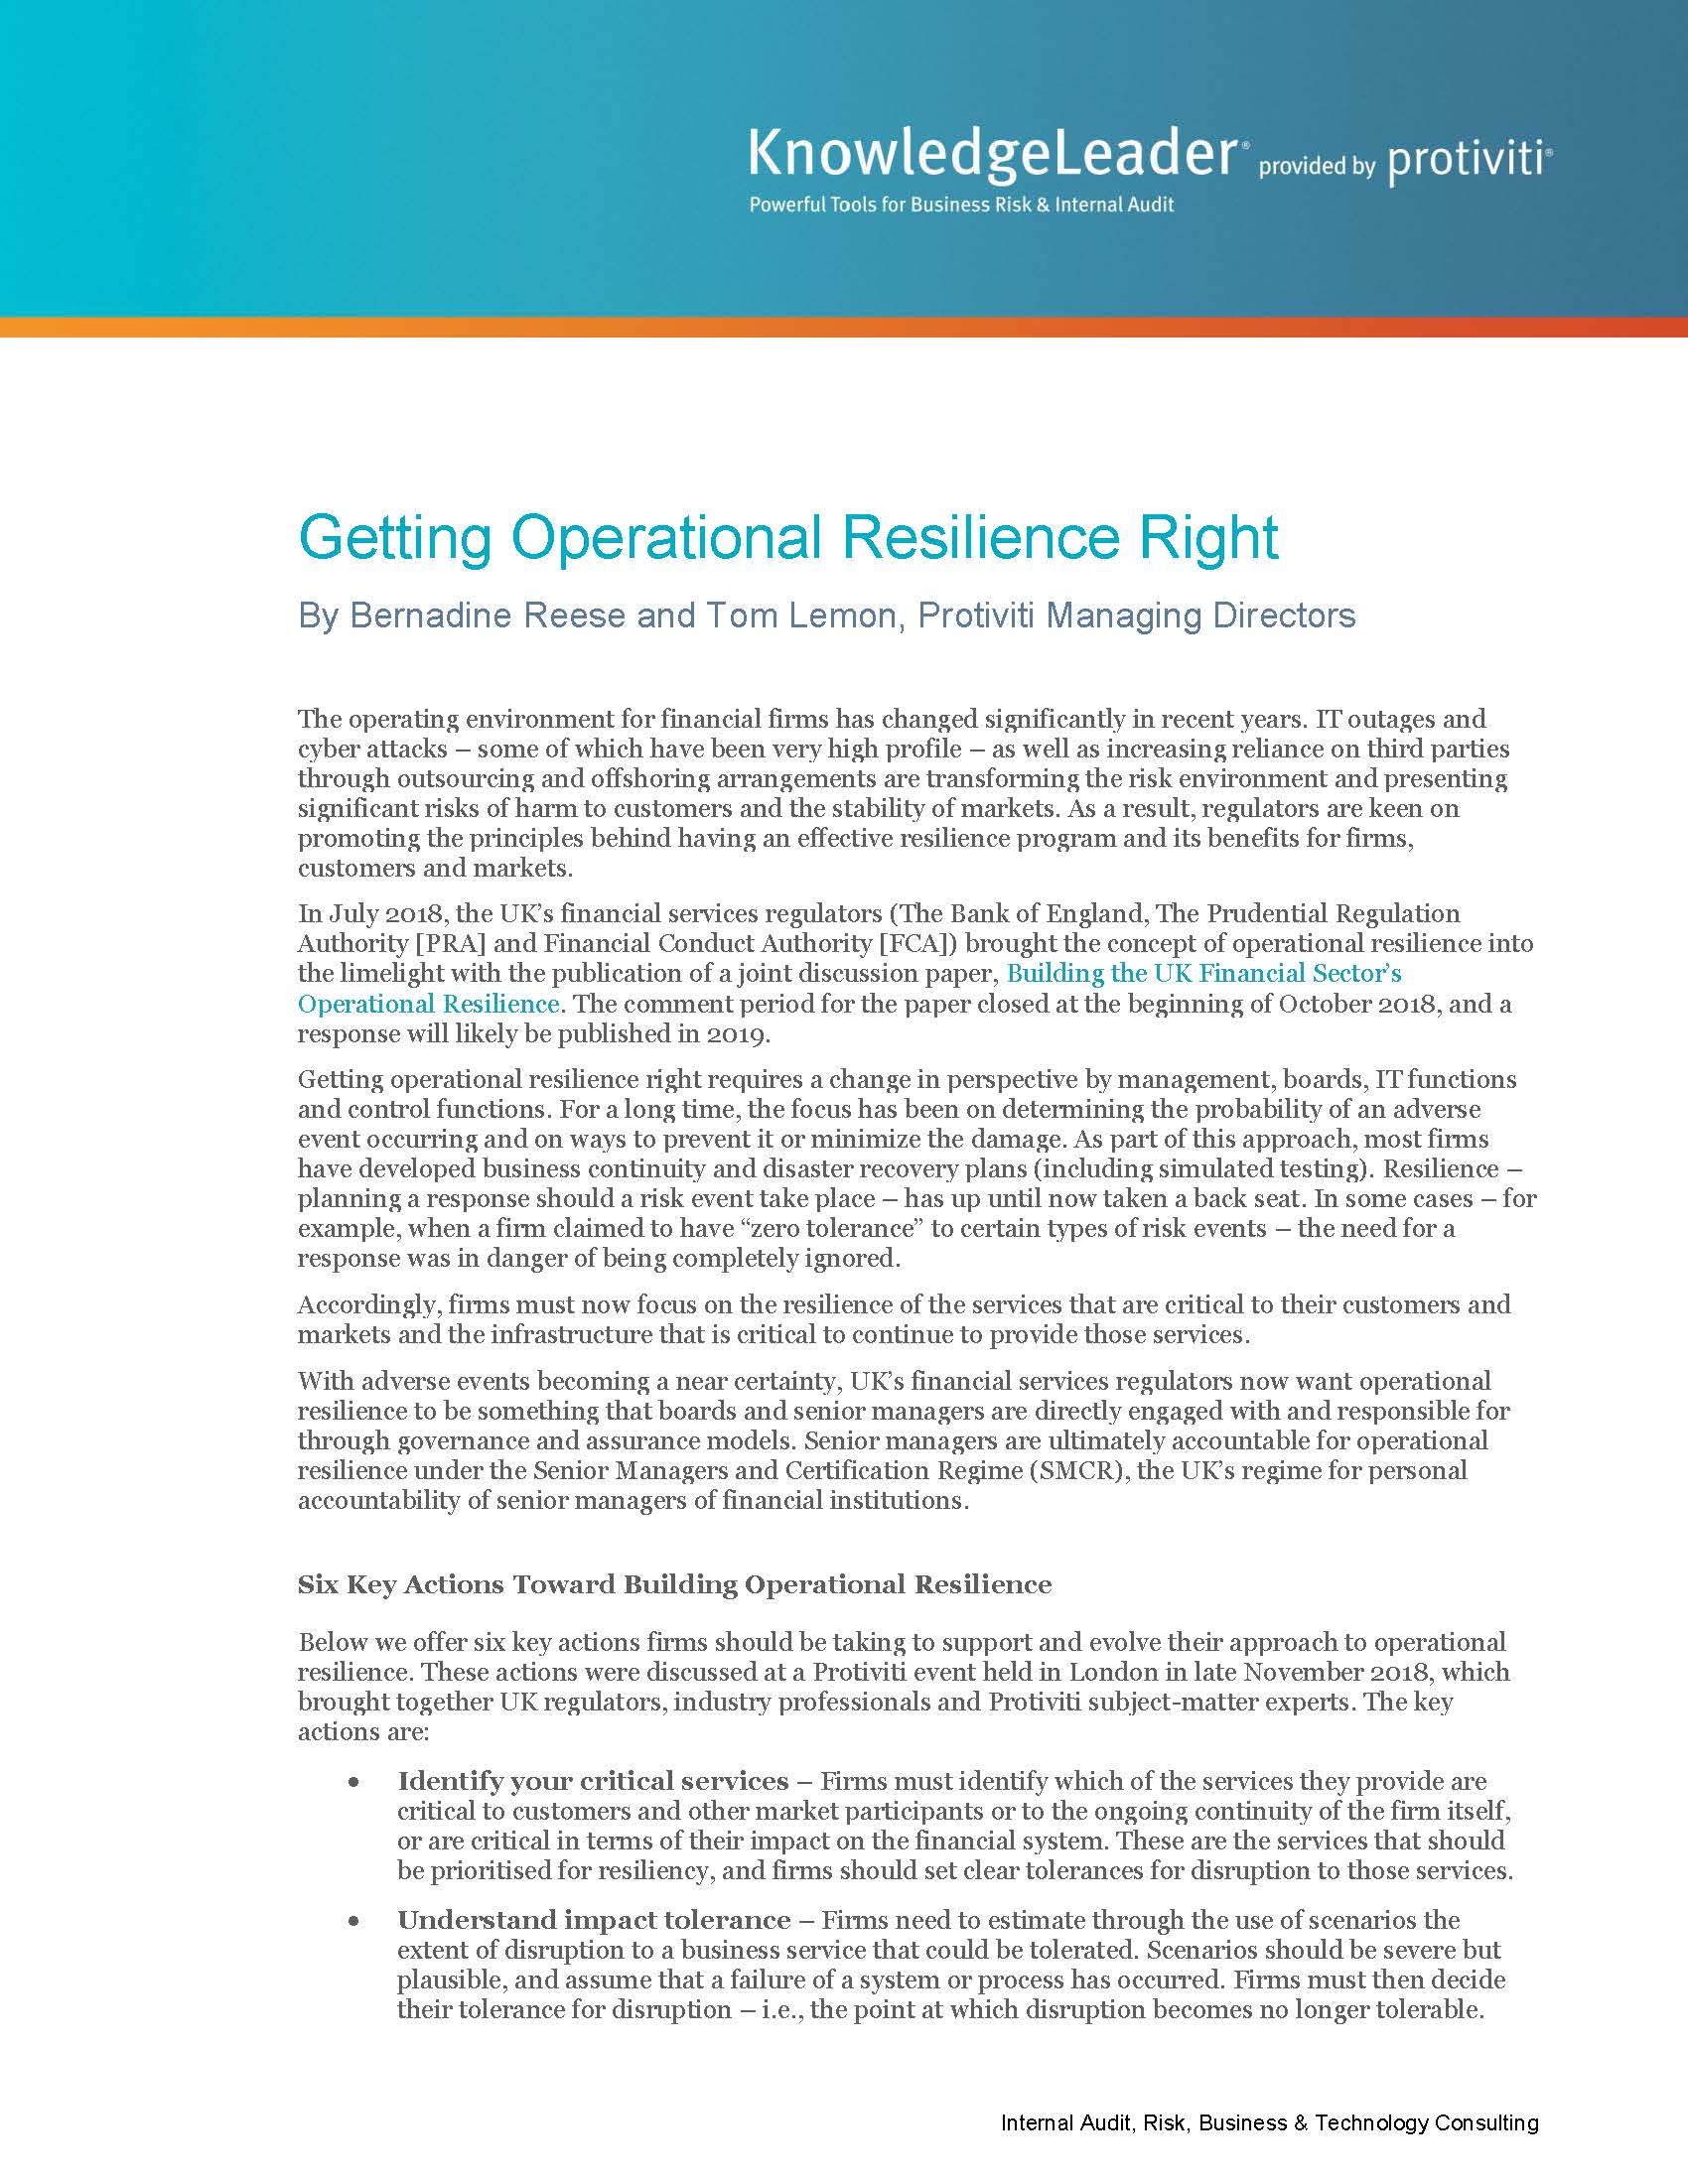 Screenshot of the first page of Getting Operational Resilience Right